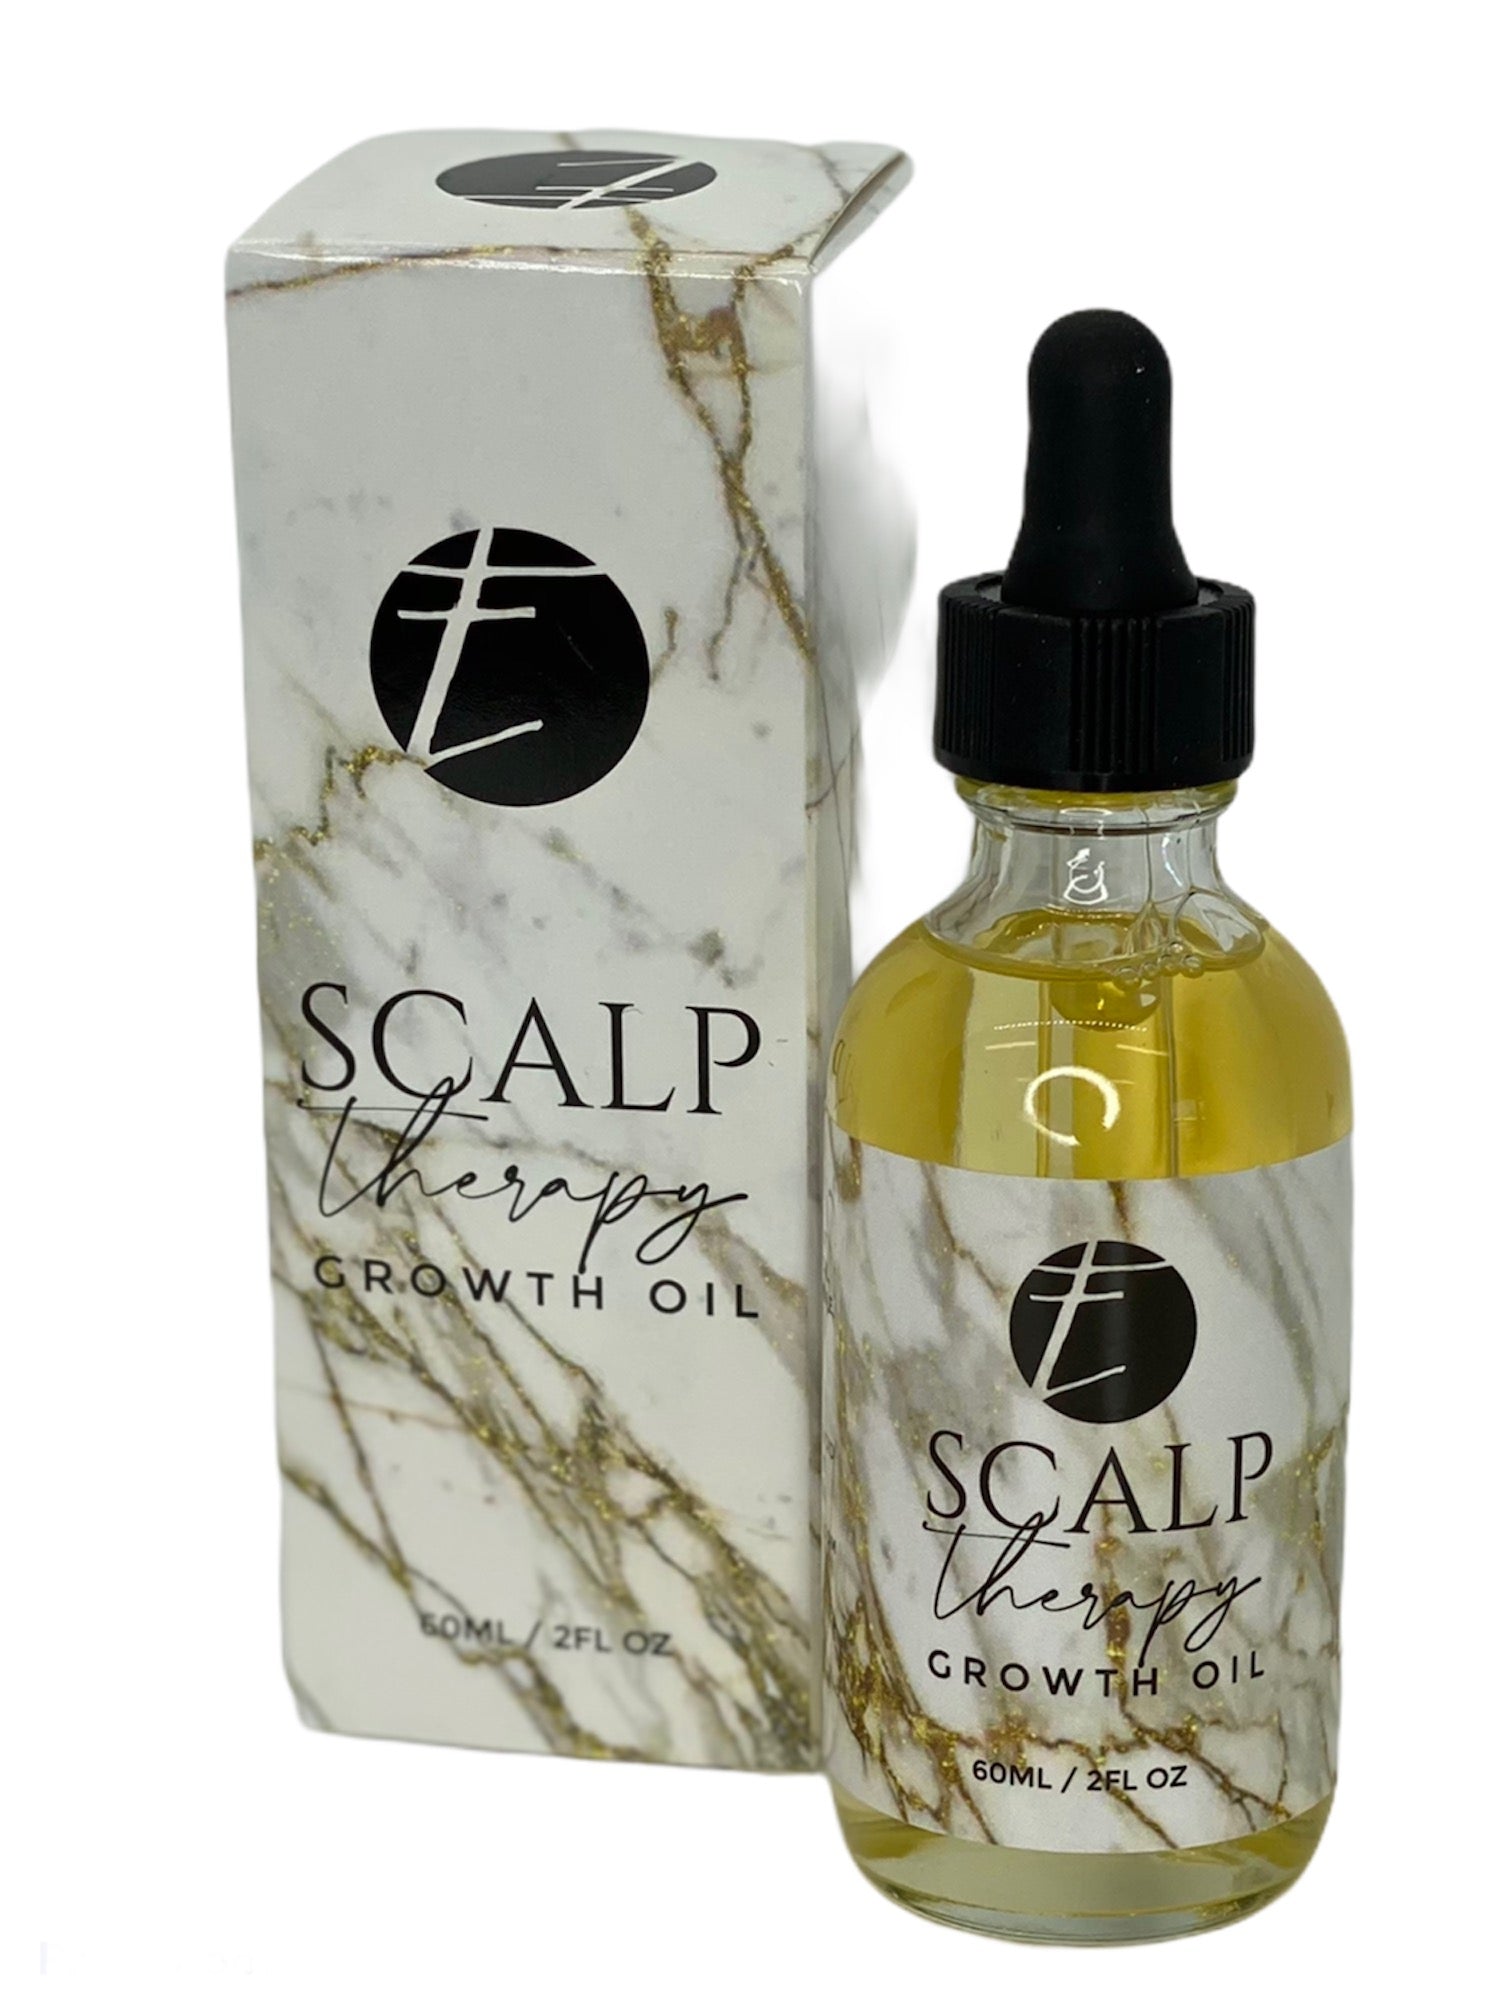 Scalp Therapy growth oil